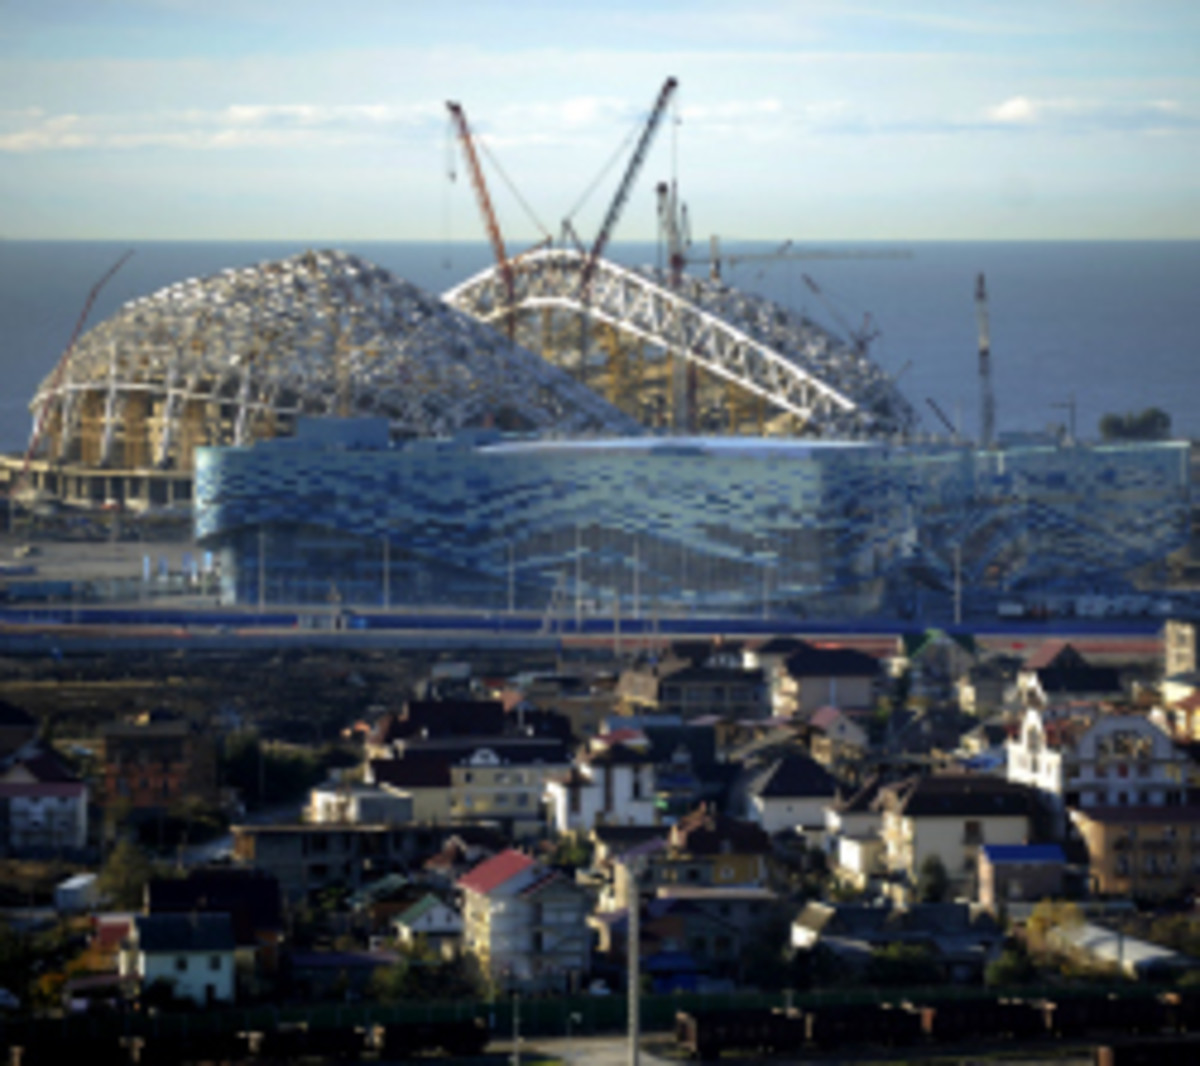 The Skating Palace and Olympic Stadium construction site in Sochi, Russia. The city recently cancelled its plans to exterminate thousands of animals before hosting the 2014 Games. (AFP via Getty Images)